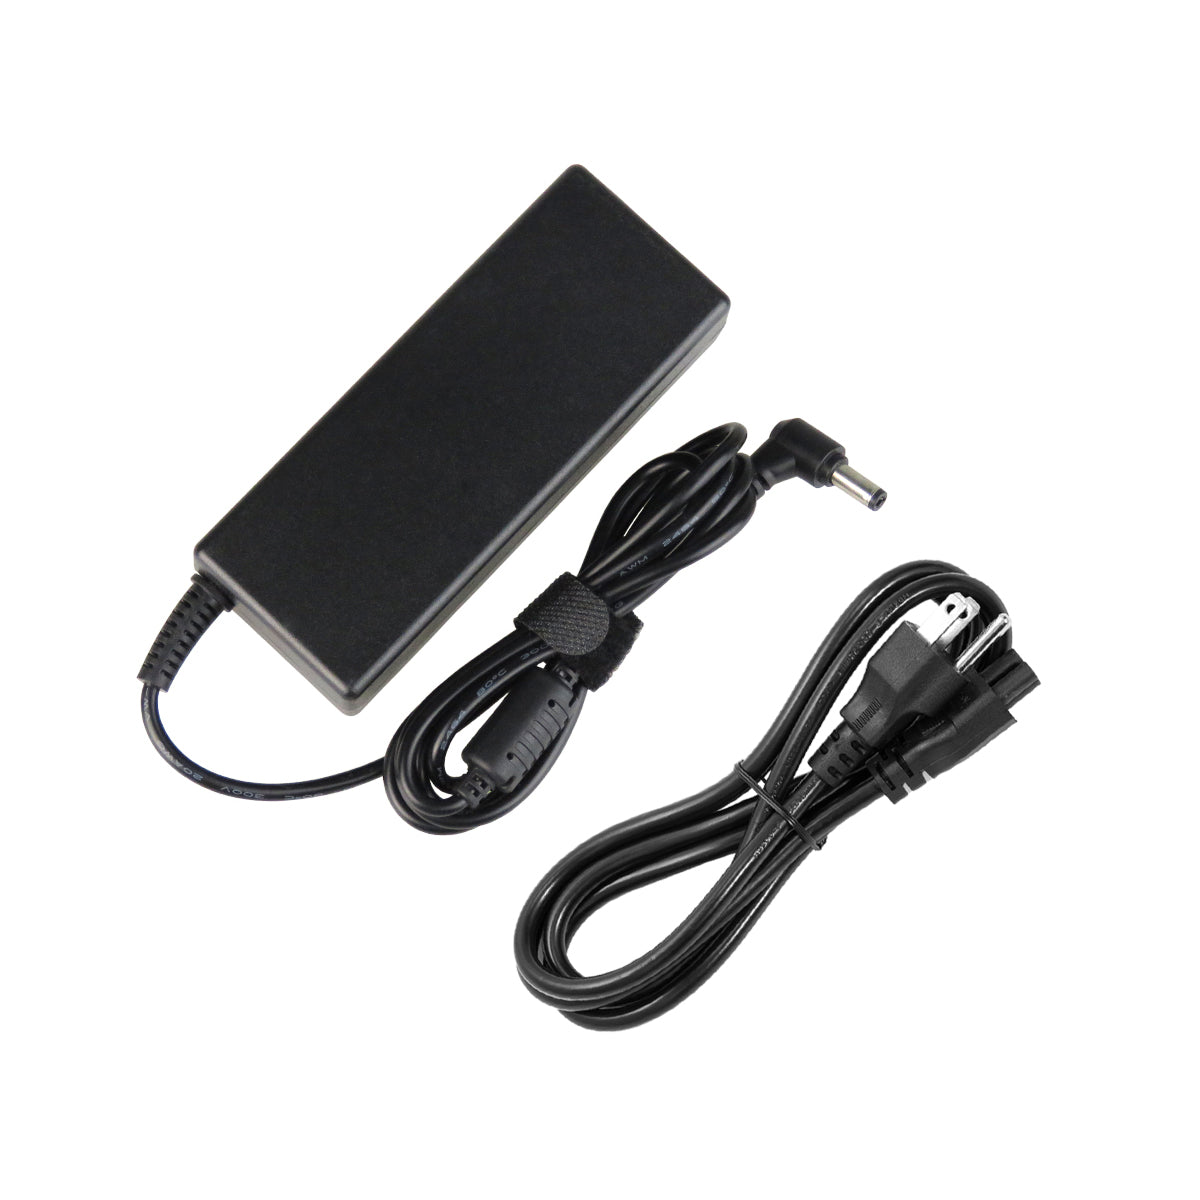 AC Adapter Charger for ASUS K73TK Notebook.